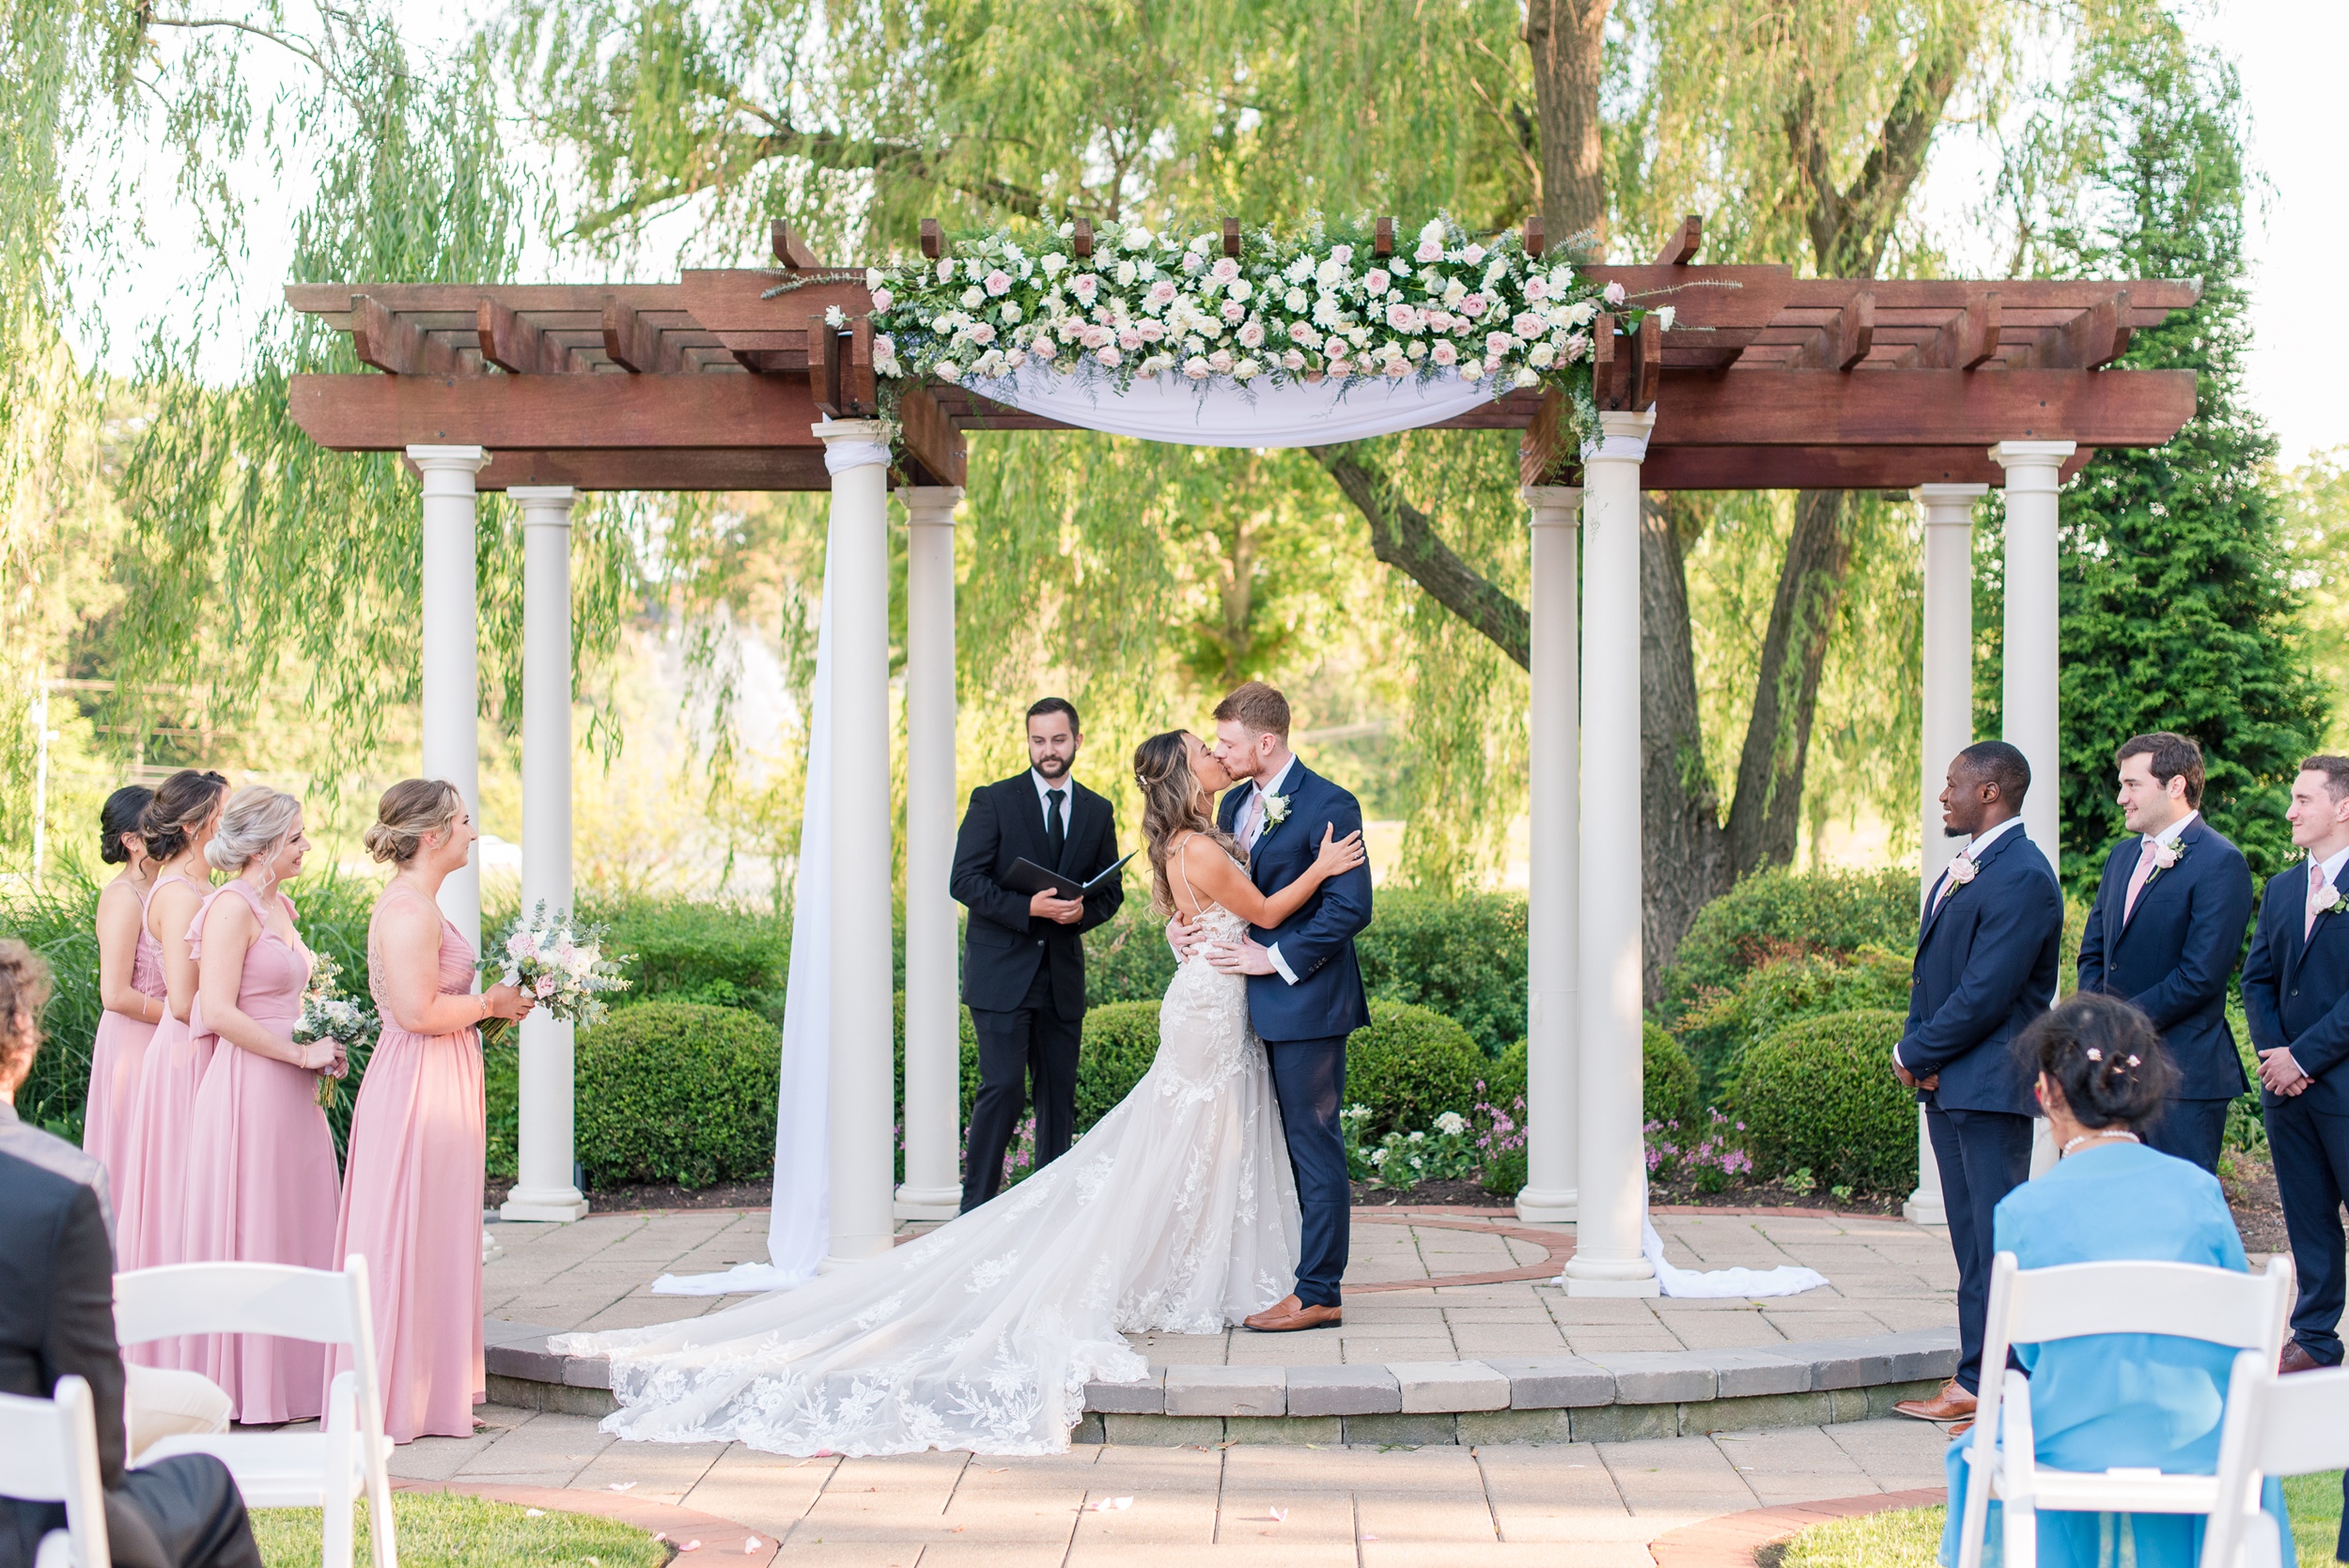 Newlyweds kiss under a decorated pergola to end their wedding ceremony